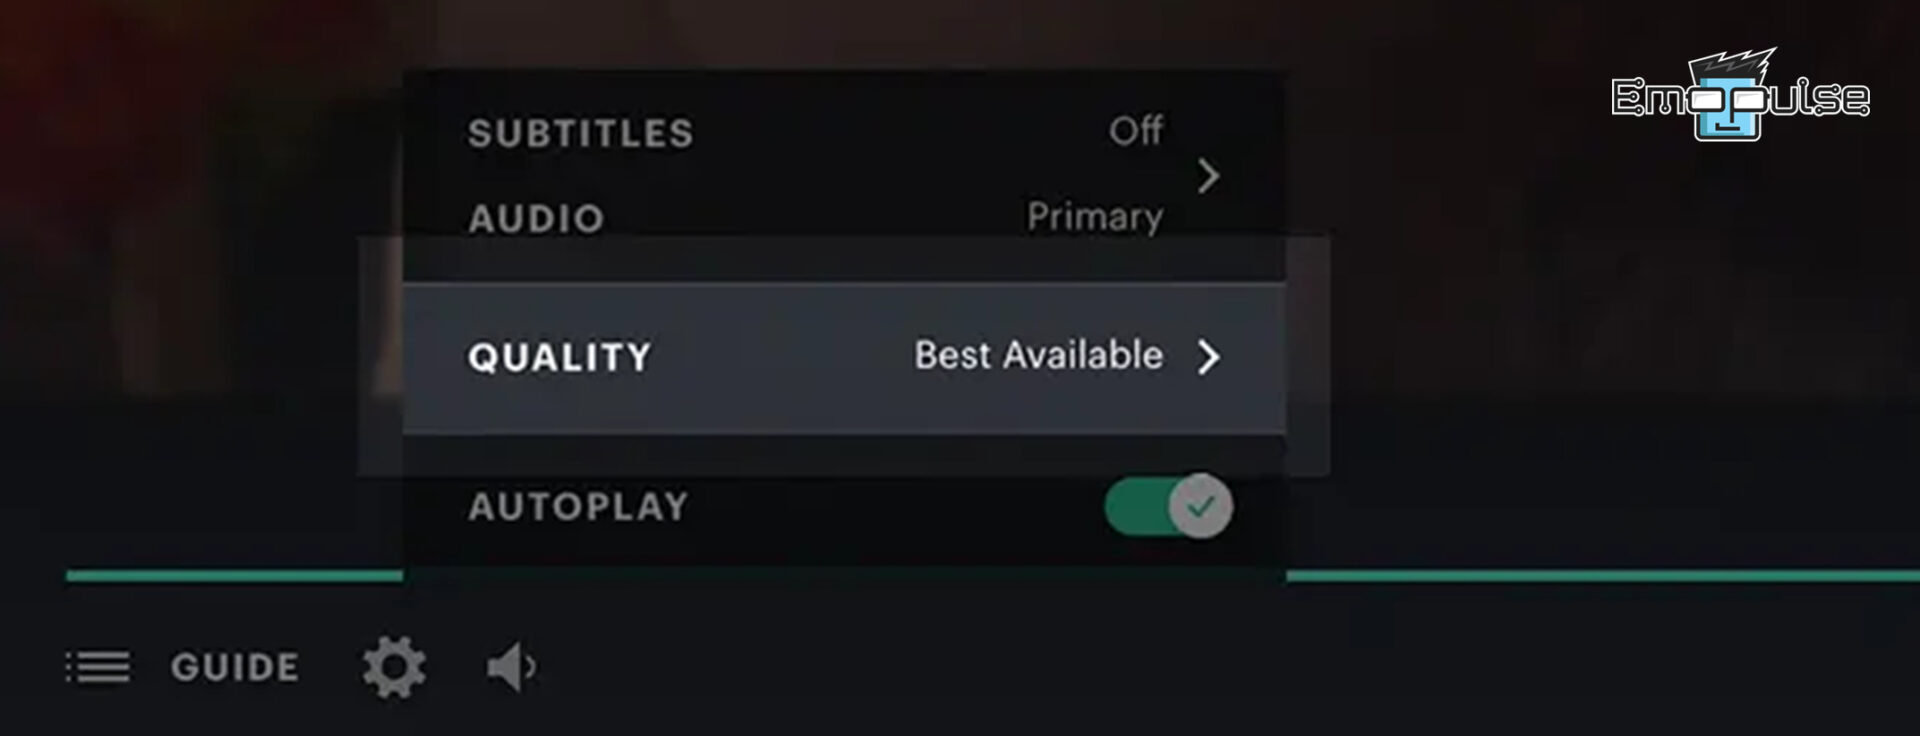 Fix Hulu Server Key Expired issue by adjusting video quality settings